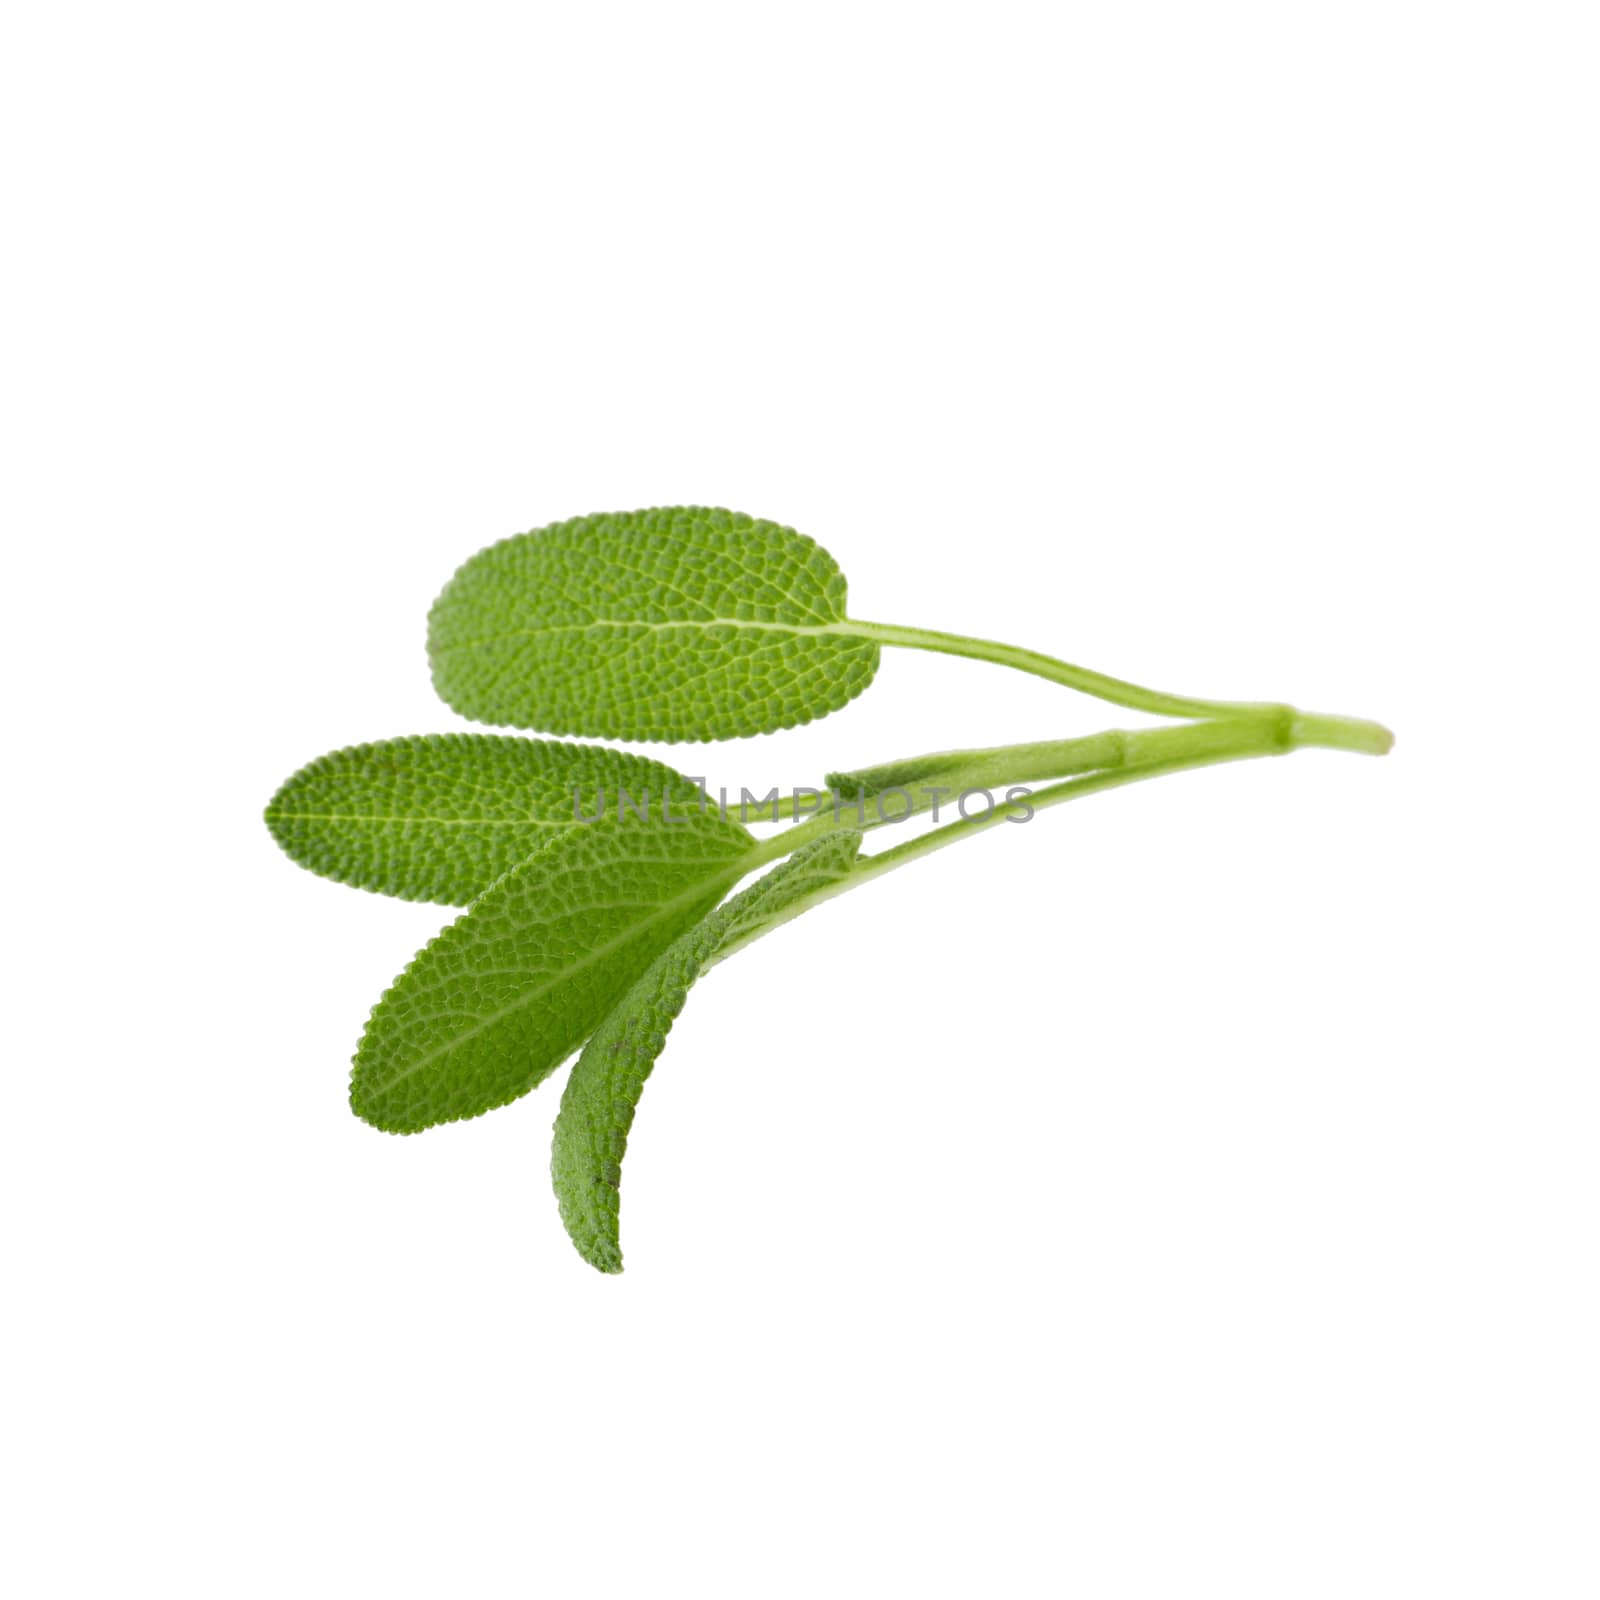 Sage plant isolated on a white background.